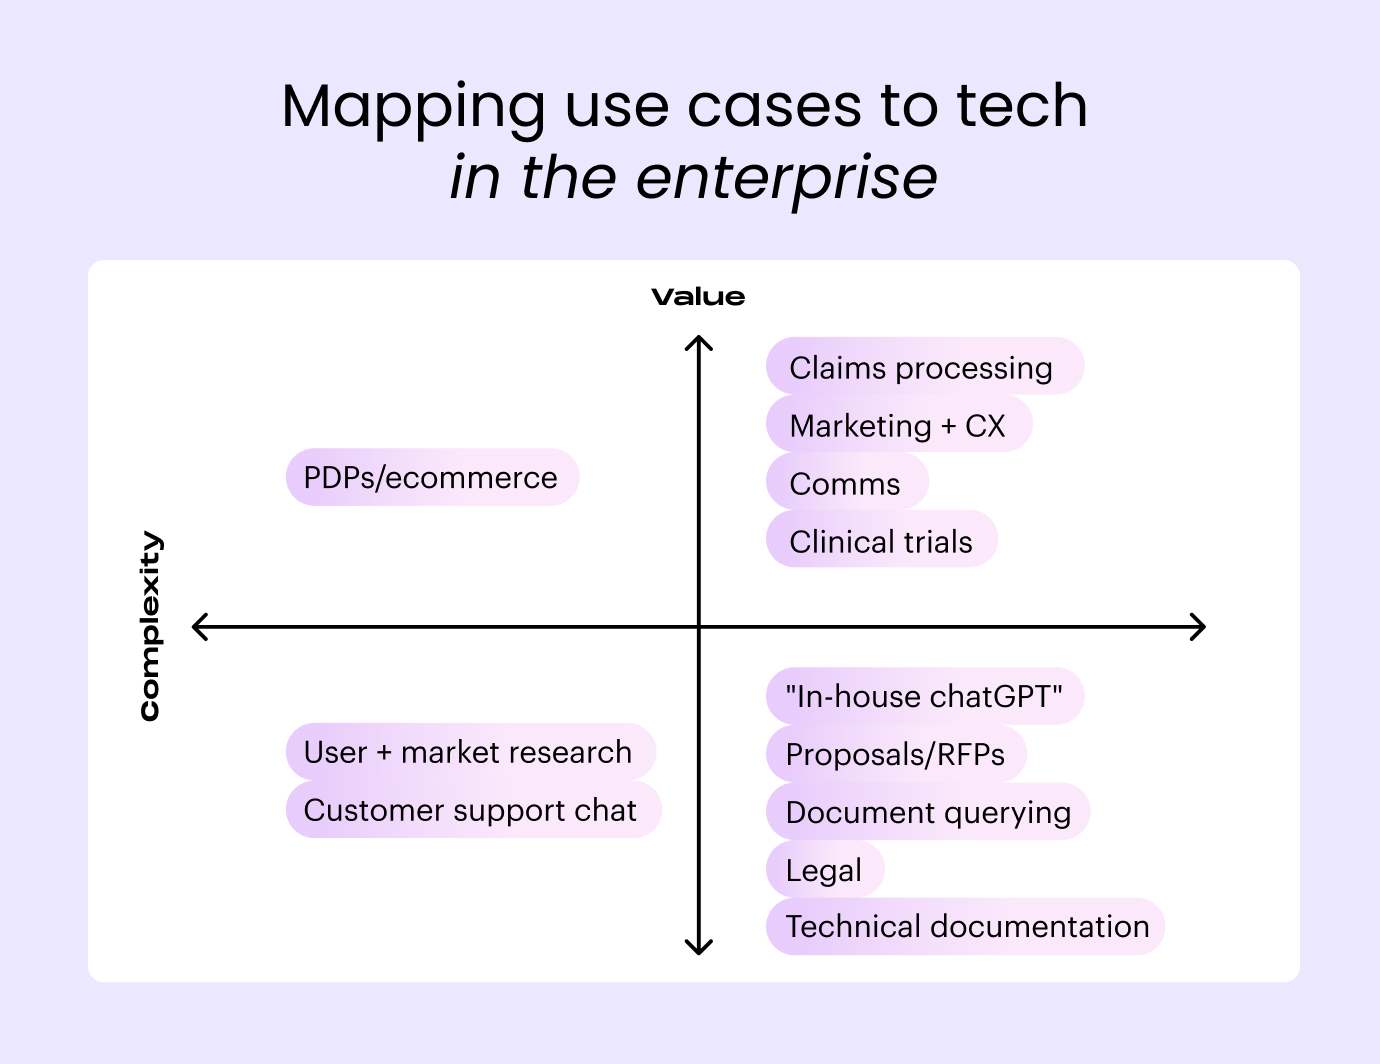 Mapping use cases to tech in the enterprise